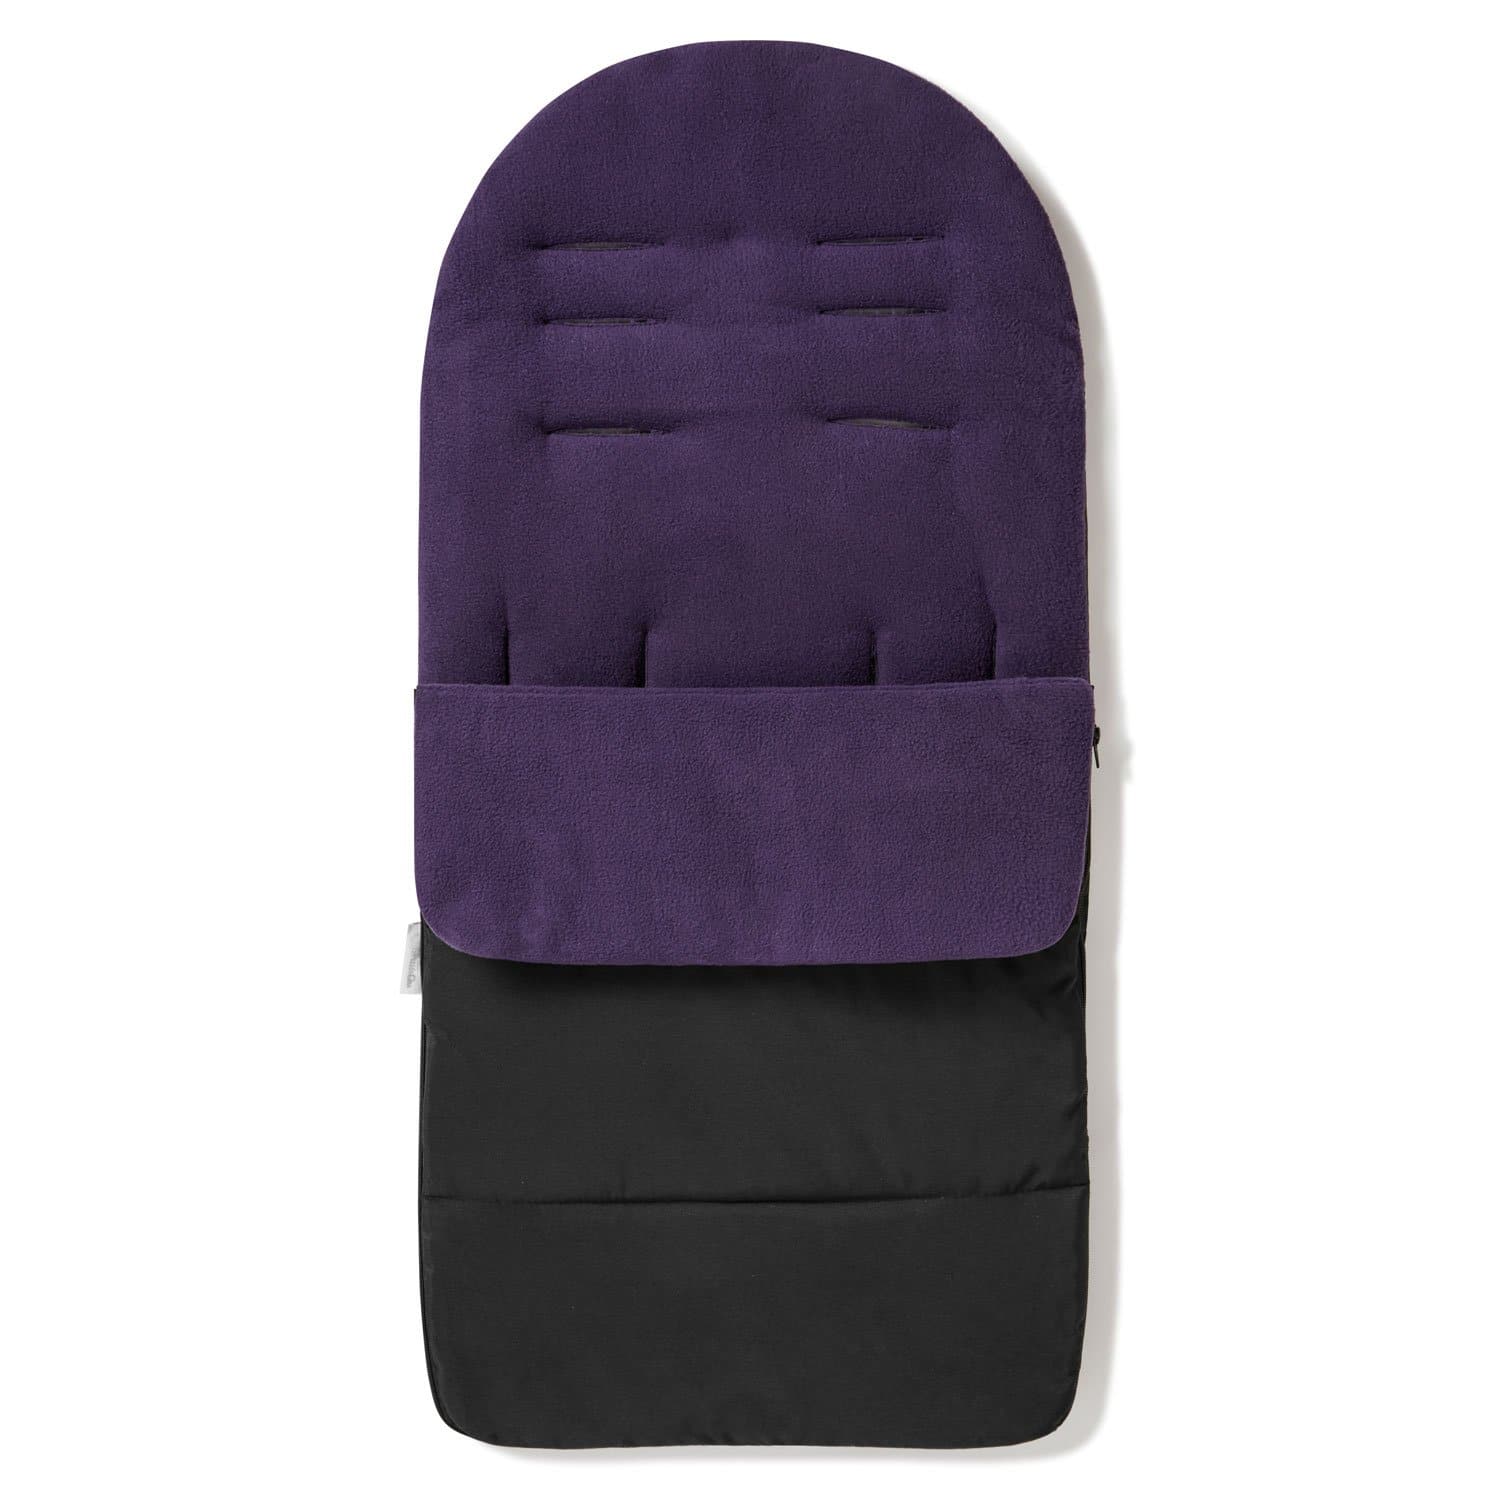 Premium Footmuff / Cosy Toes Compatible with Kiddicouture - Plum Purple / Fits All Models | For Your Little One